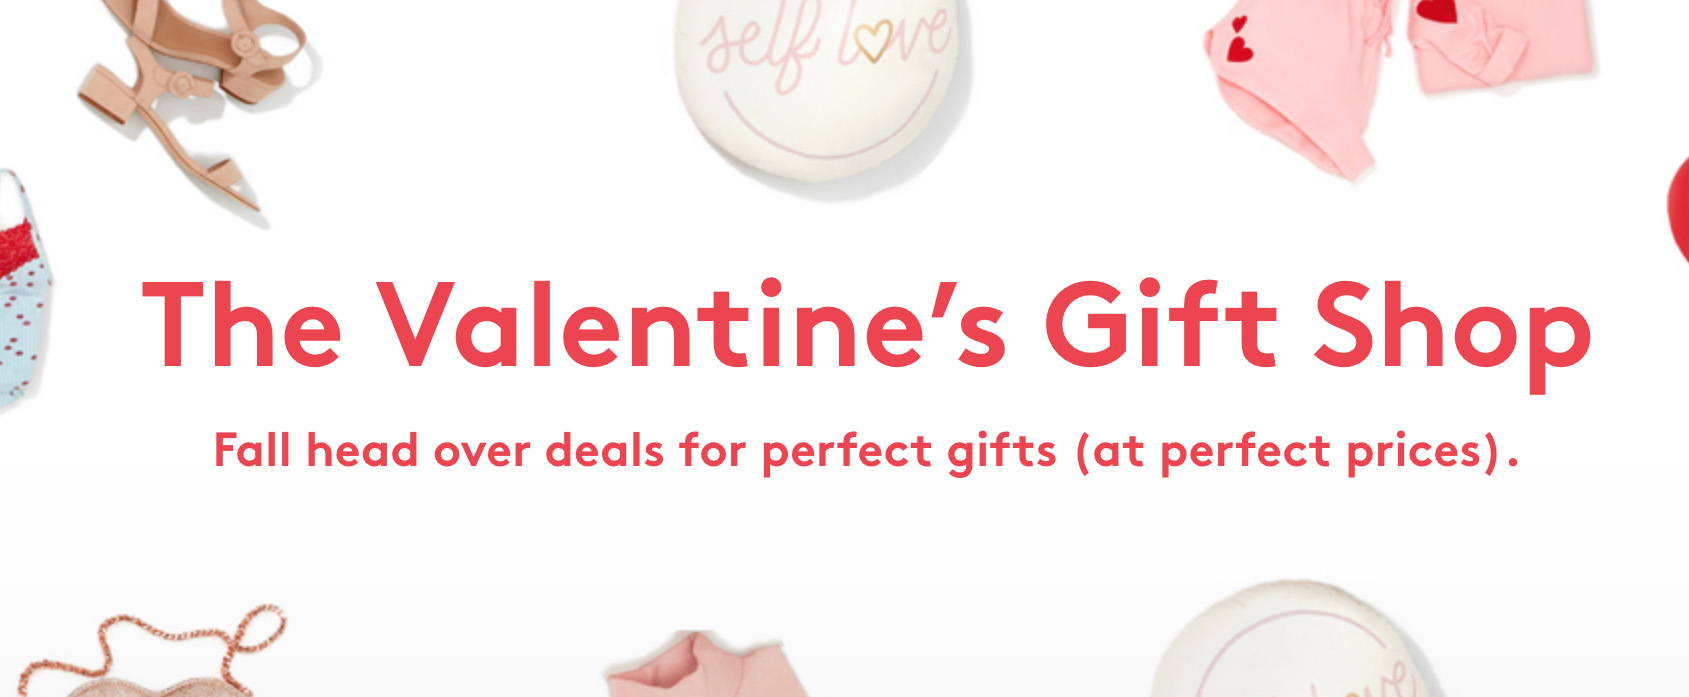 Nordstrom Rack's Valentine's Day Gift Guide is live with an